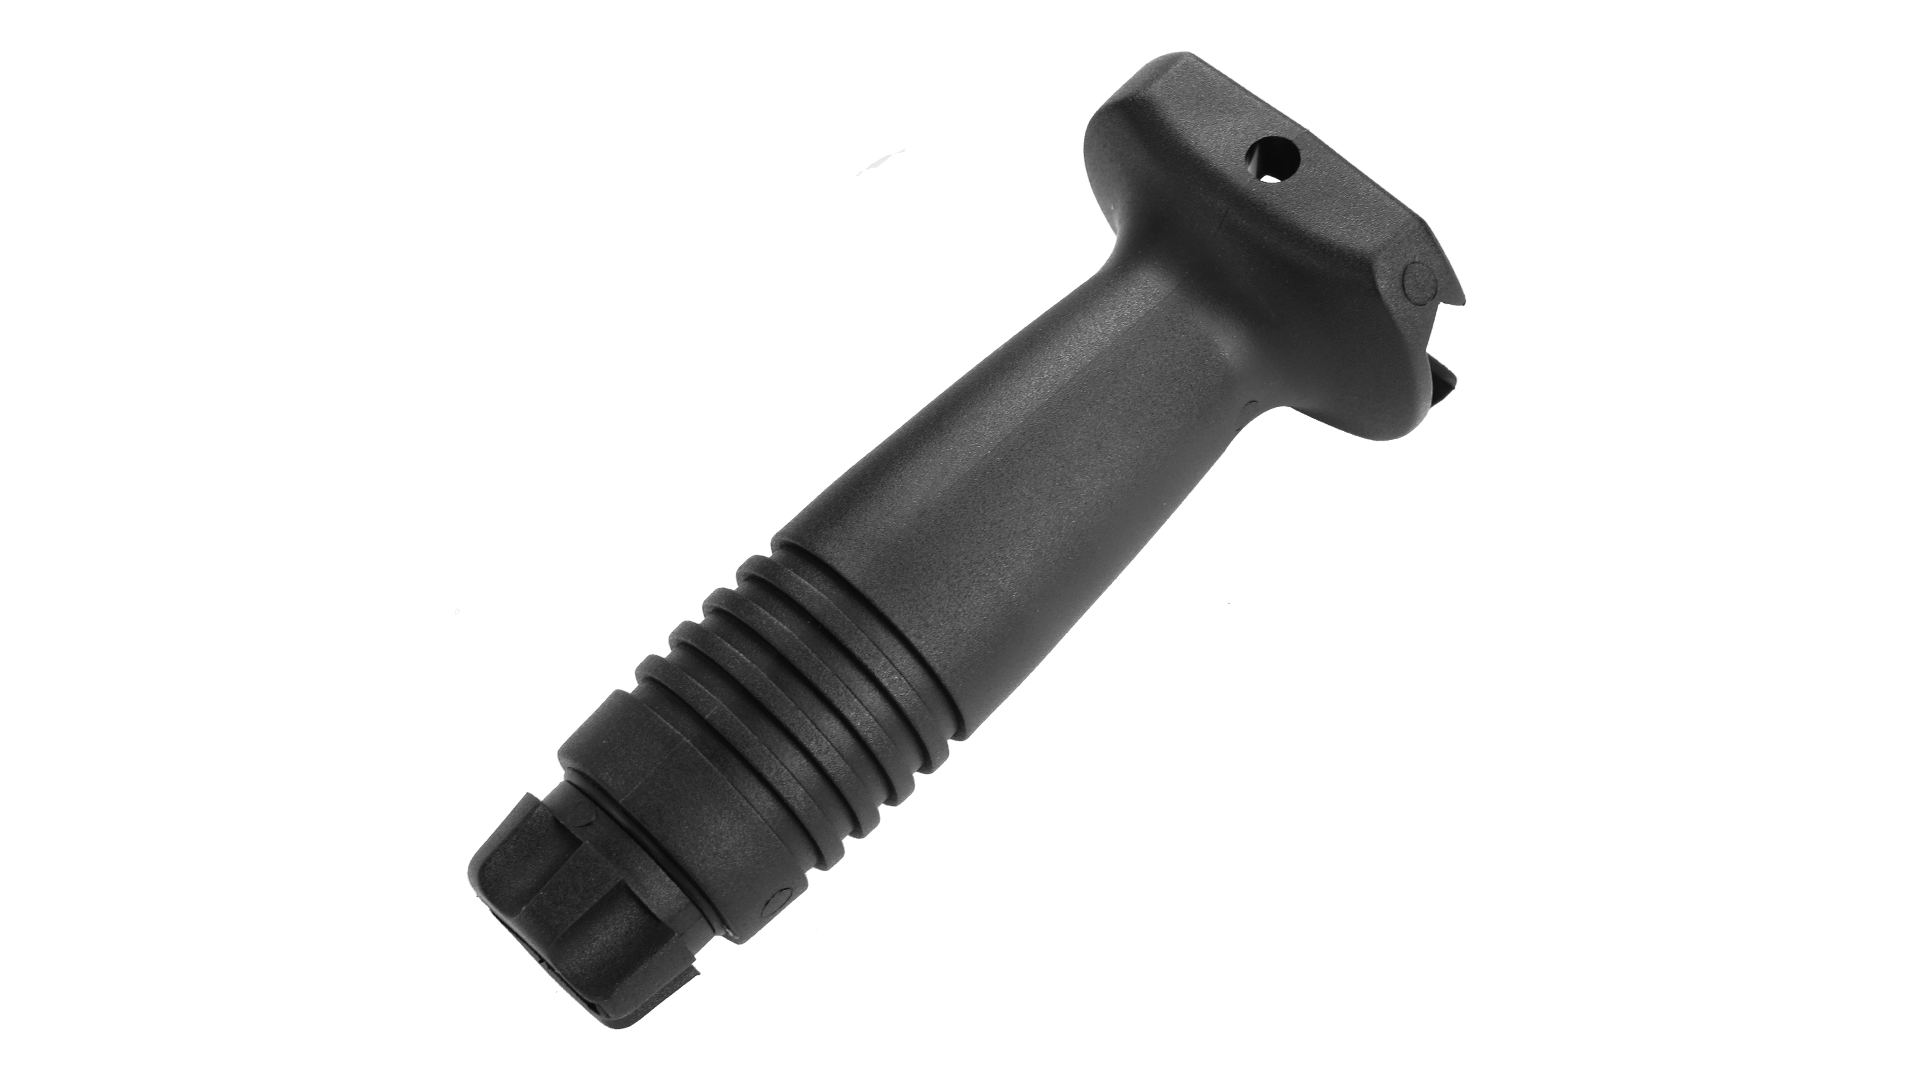 【MP-53】TACTICAL FOREGRIP - BK